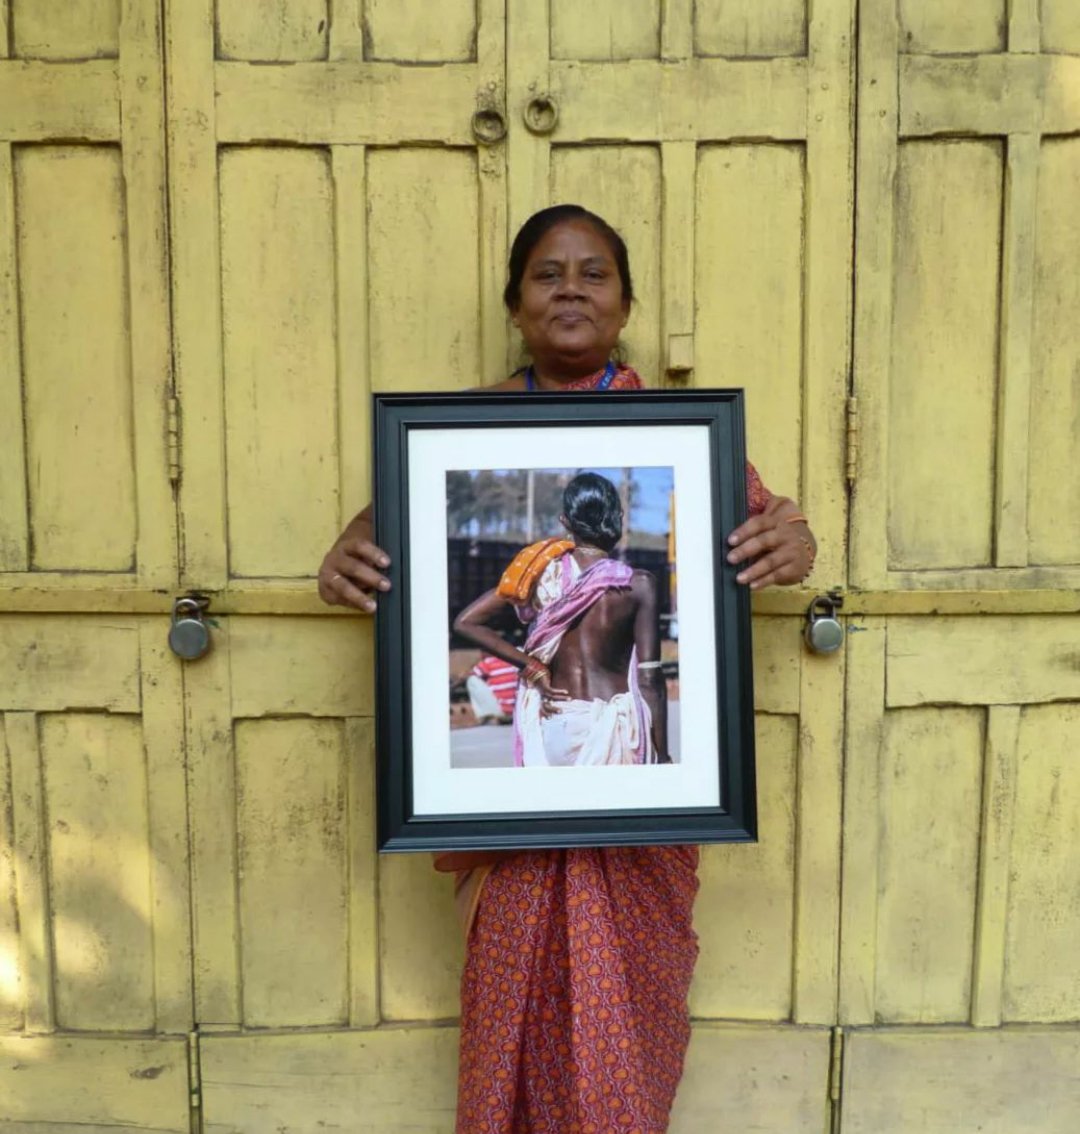 Sisterhood. The power of a woman. A friendly shop owner unveils our New Year photo in the NO RUSH photography exhibition by 
The Raven Brothers. Best wishes for 2024!

#photography #photo #exhibition #gallery #india #neverstopexploring #photooftheday